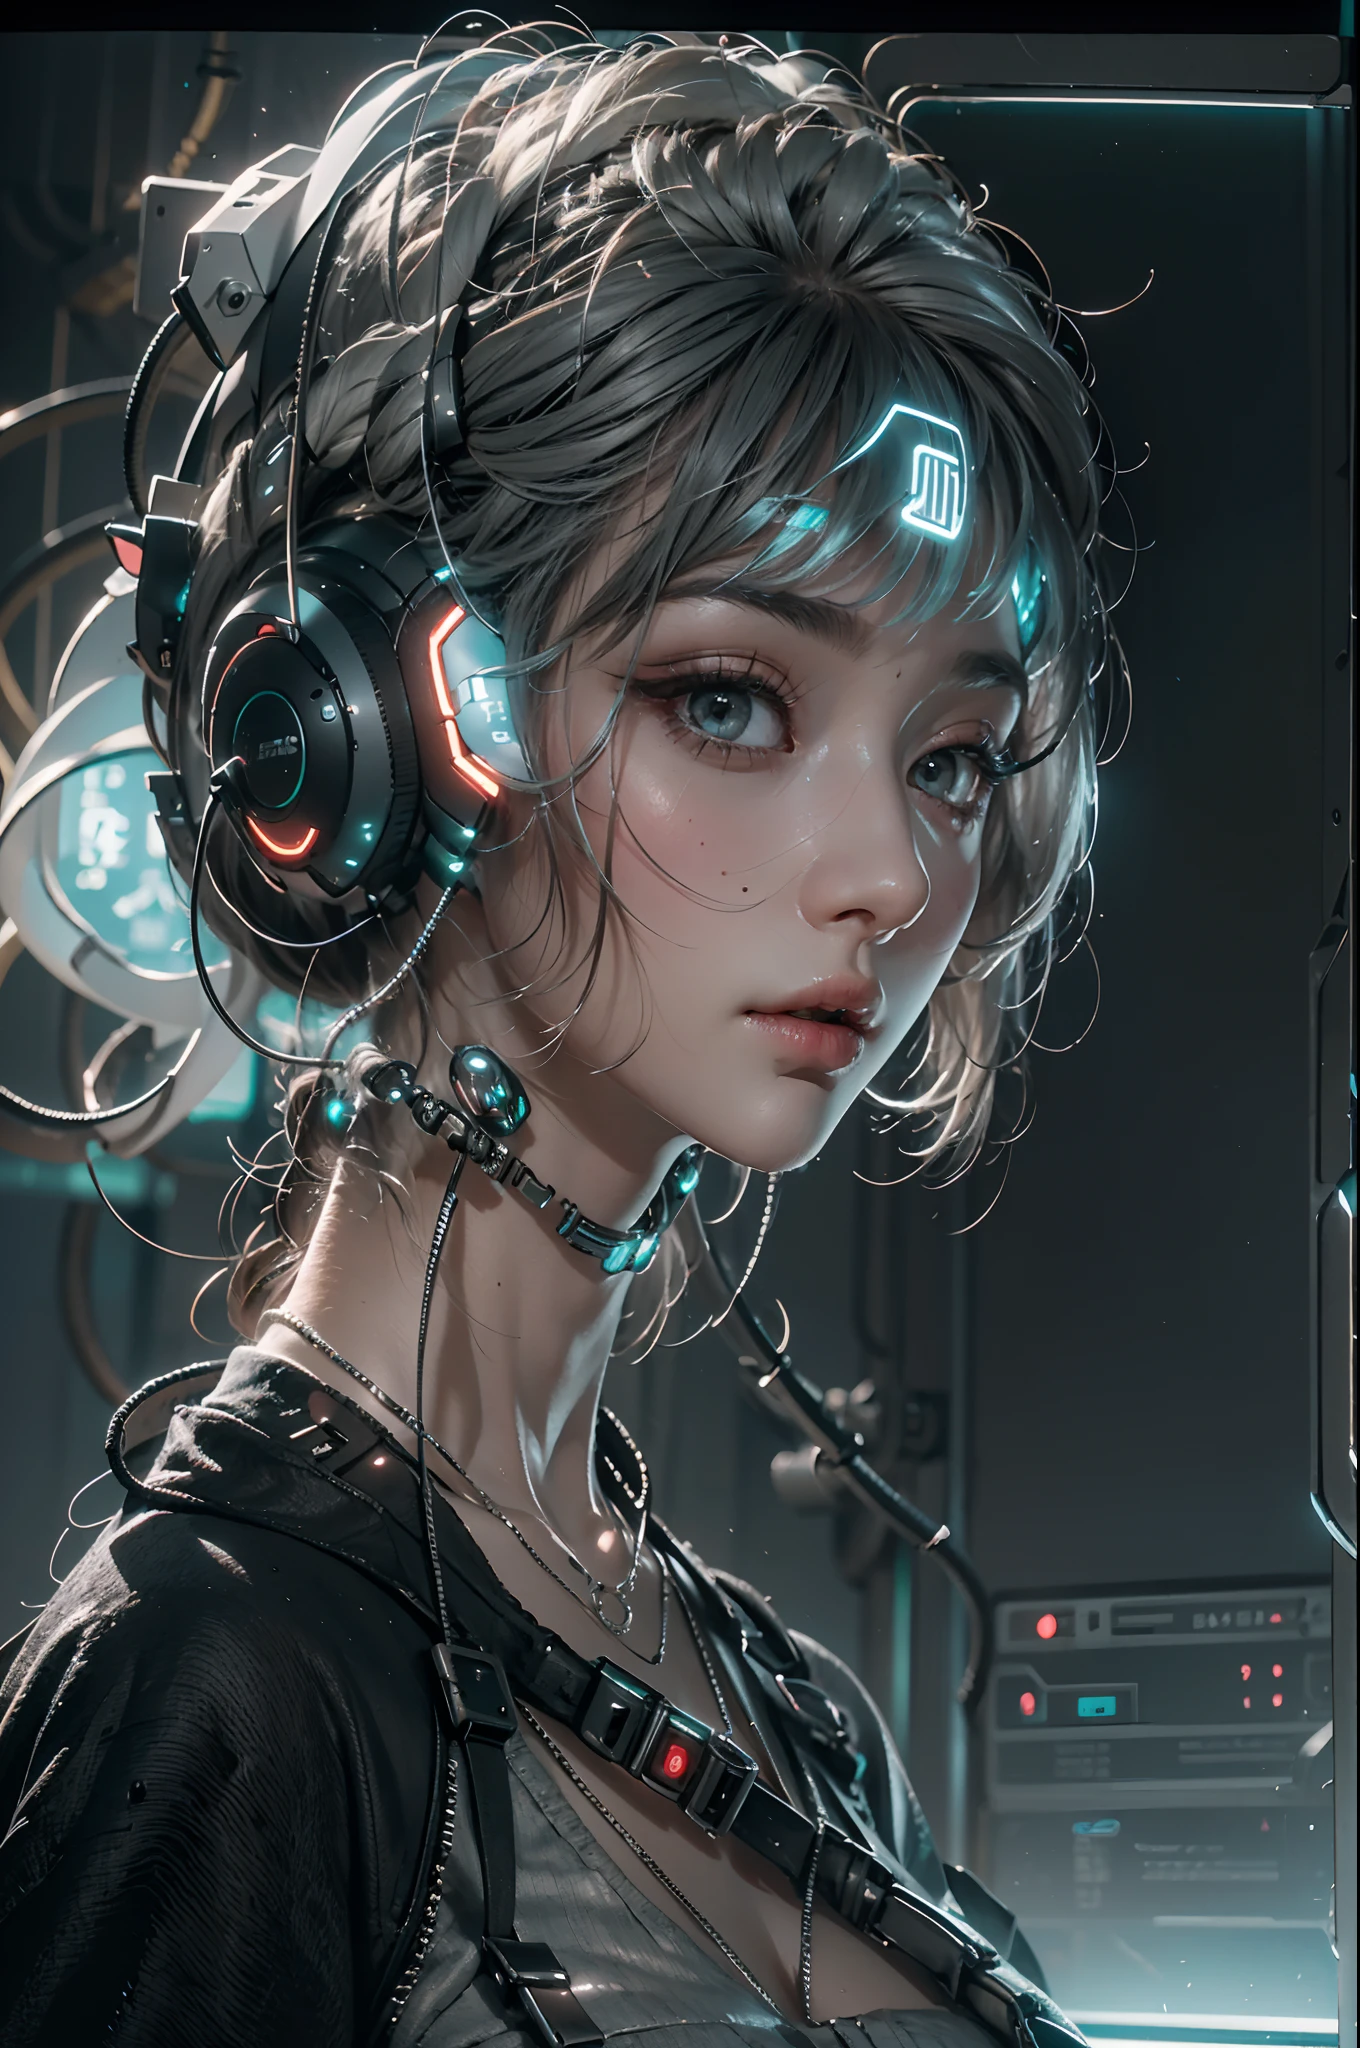 Full body like，1girll，Perfect facial features，delicated face，(((Clean face)))，(cyber punk perssonage:1.3)，Bring headphones，shelmet，jewely，eardrop，choker necklace，inside in room，Electronic wire background，best qualtiy，tmasterpiece，Movie filter presetovie level lighting，C4D Rendering，rendering by octane，with light glowing，High chiaroscuro，